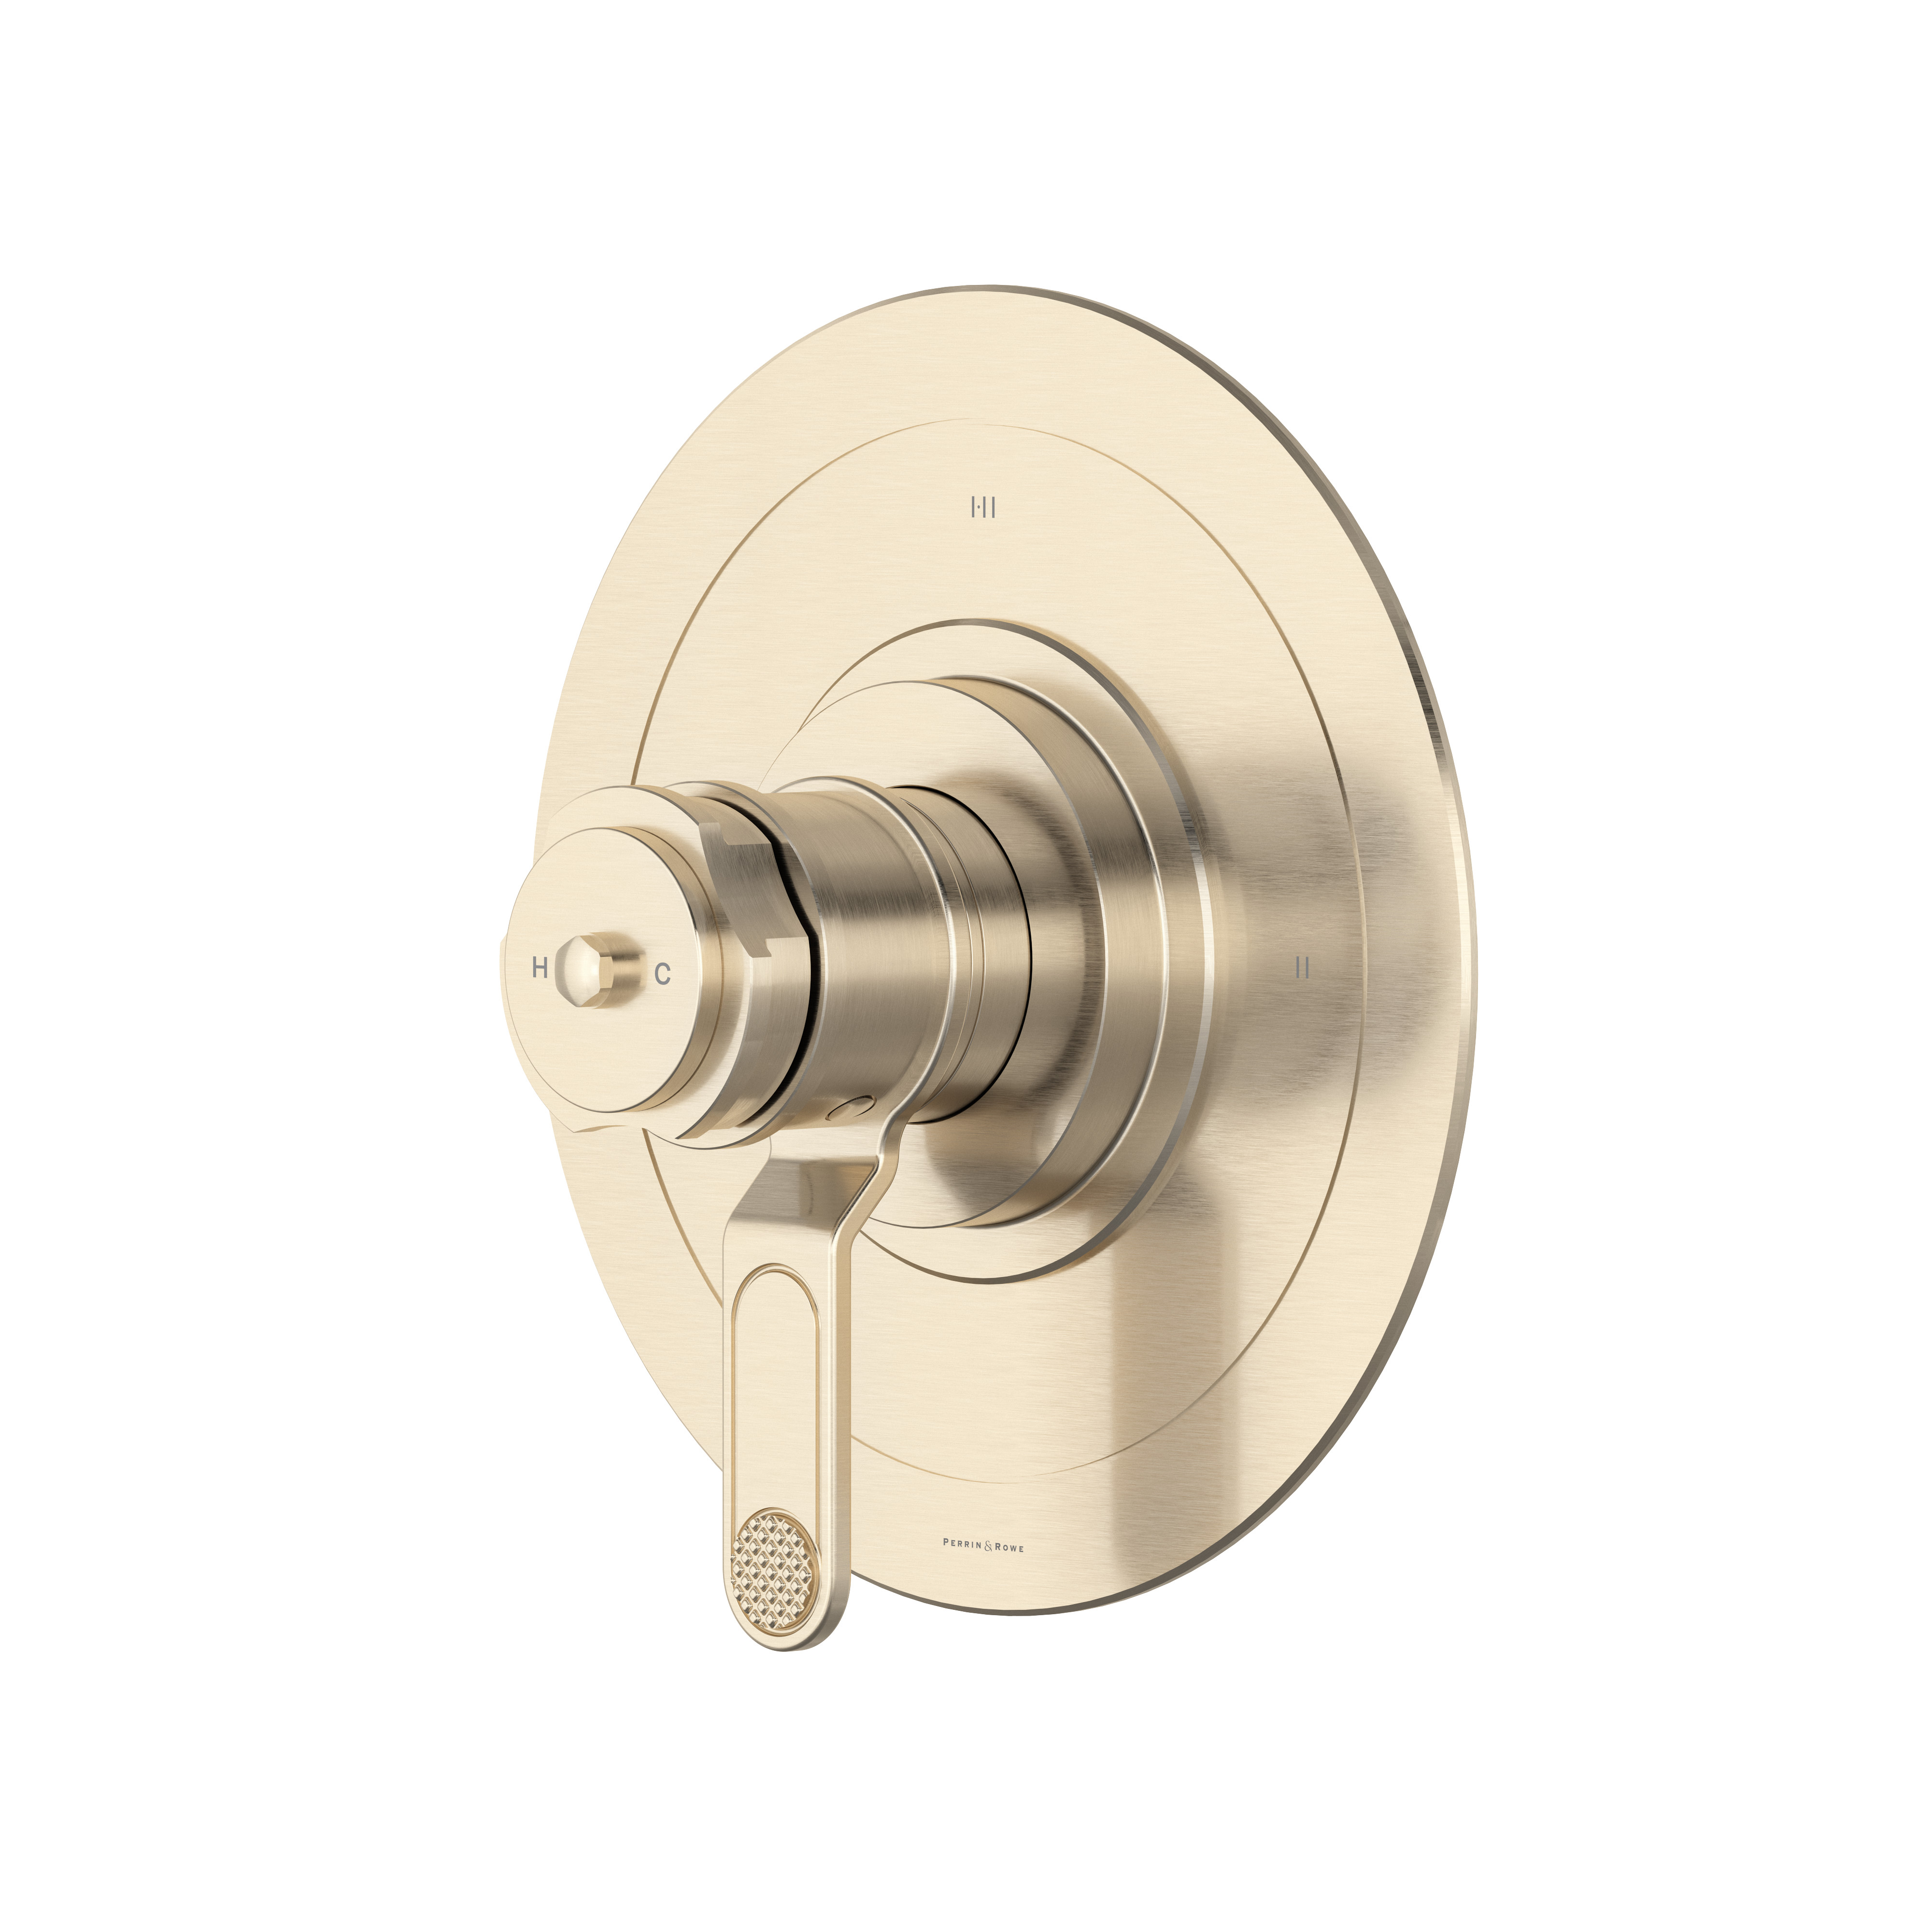 Armstrong 1/2 Inch Thermastatic & Pressure Balance Trim With 3 Functions - Satin Nickel | Model Number: U.TAR23W1DWSTN